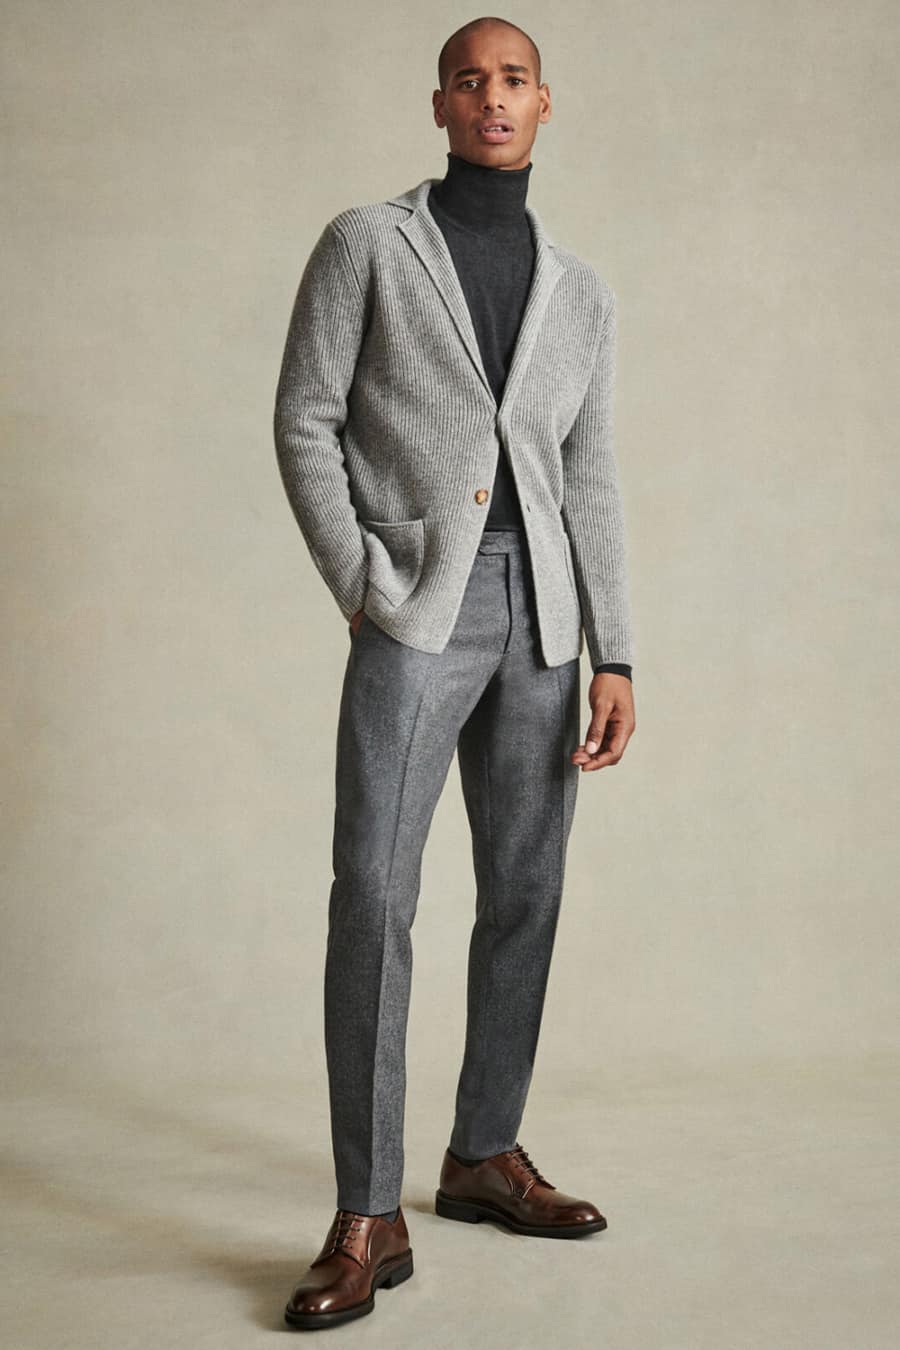 Men's grey dress pants, charcoal turtleneck, light grey knitted blazer and brown leather shoes outfit